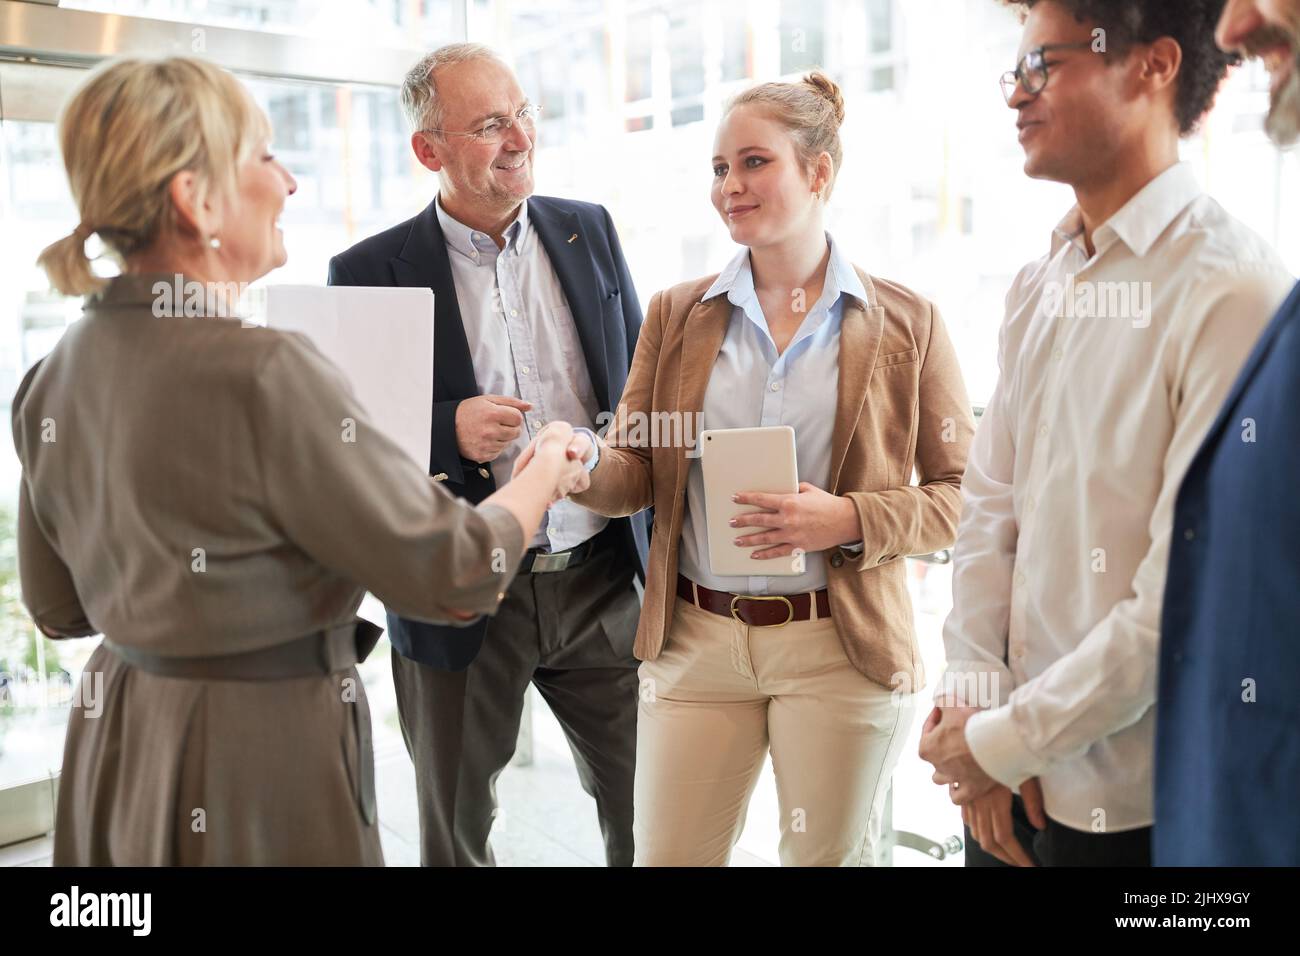 Business woman congratulates trainee or applicant for promotion or hiring in office Stock Photo